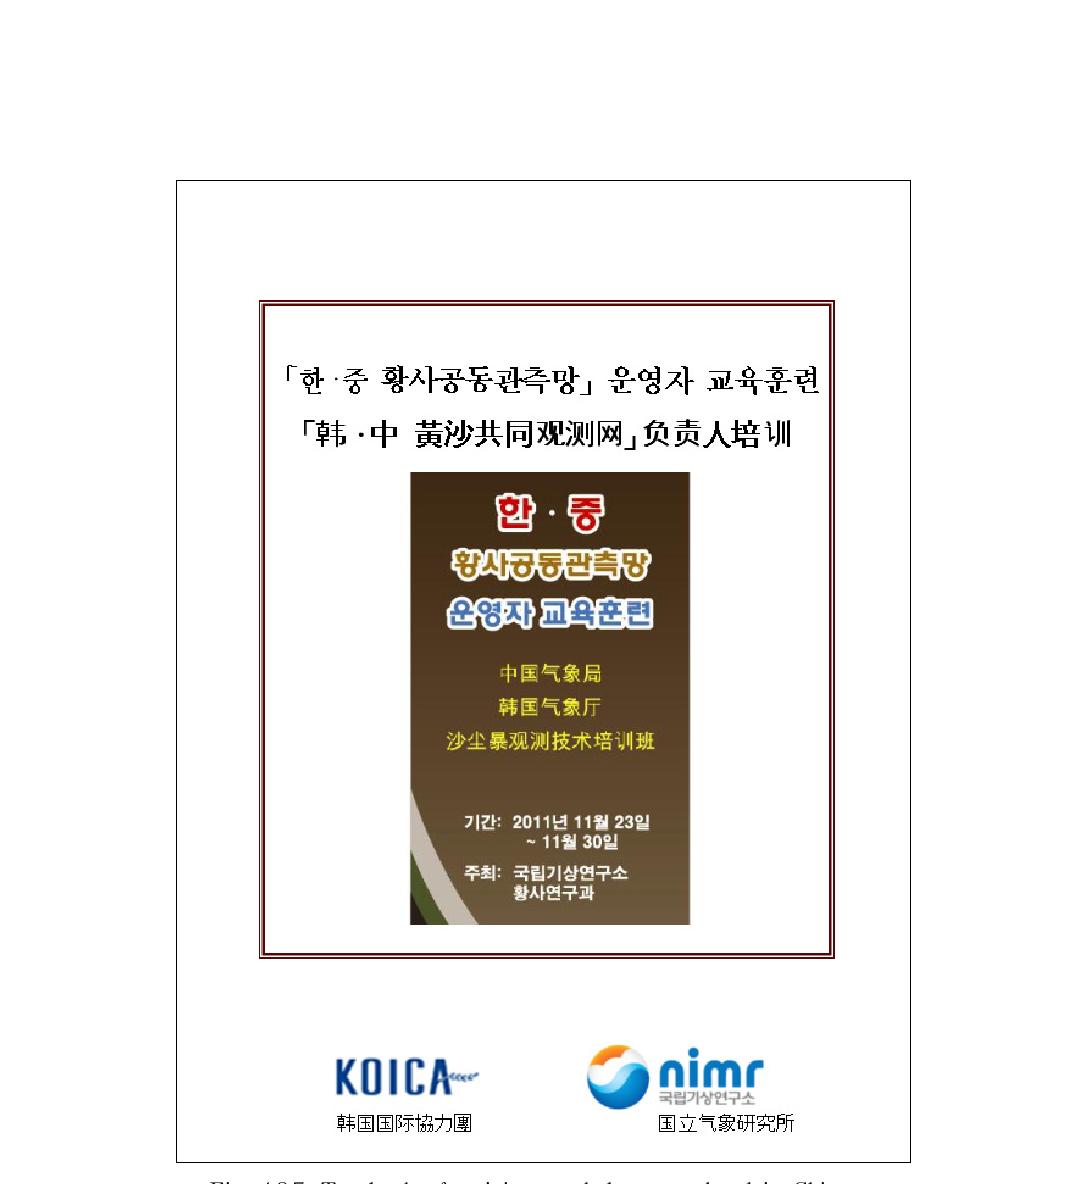 Textbook of training workshop translated in Chinese.